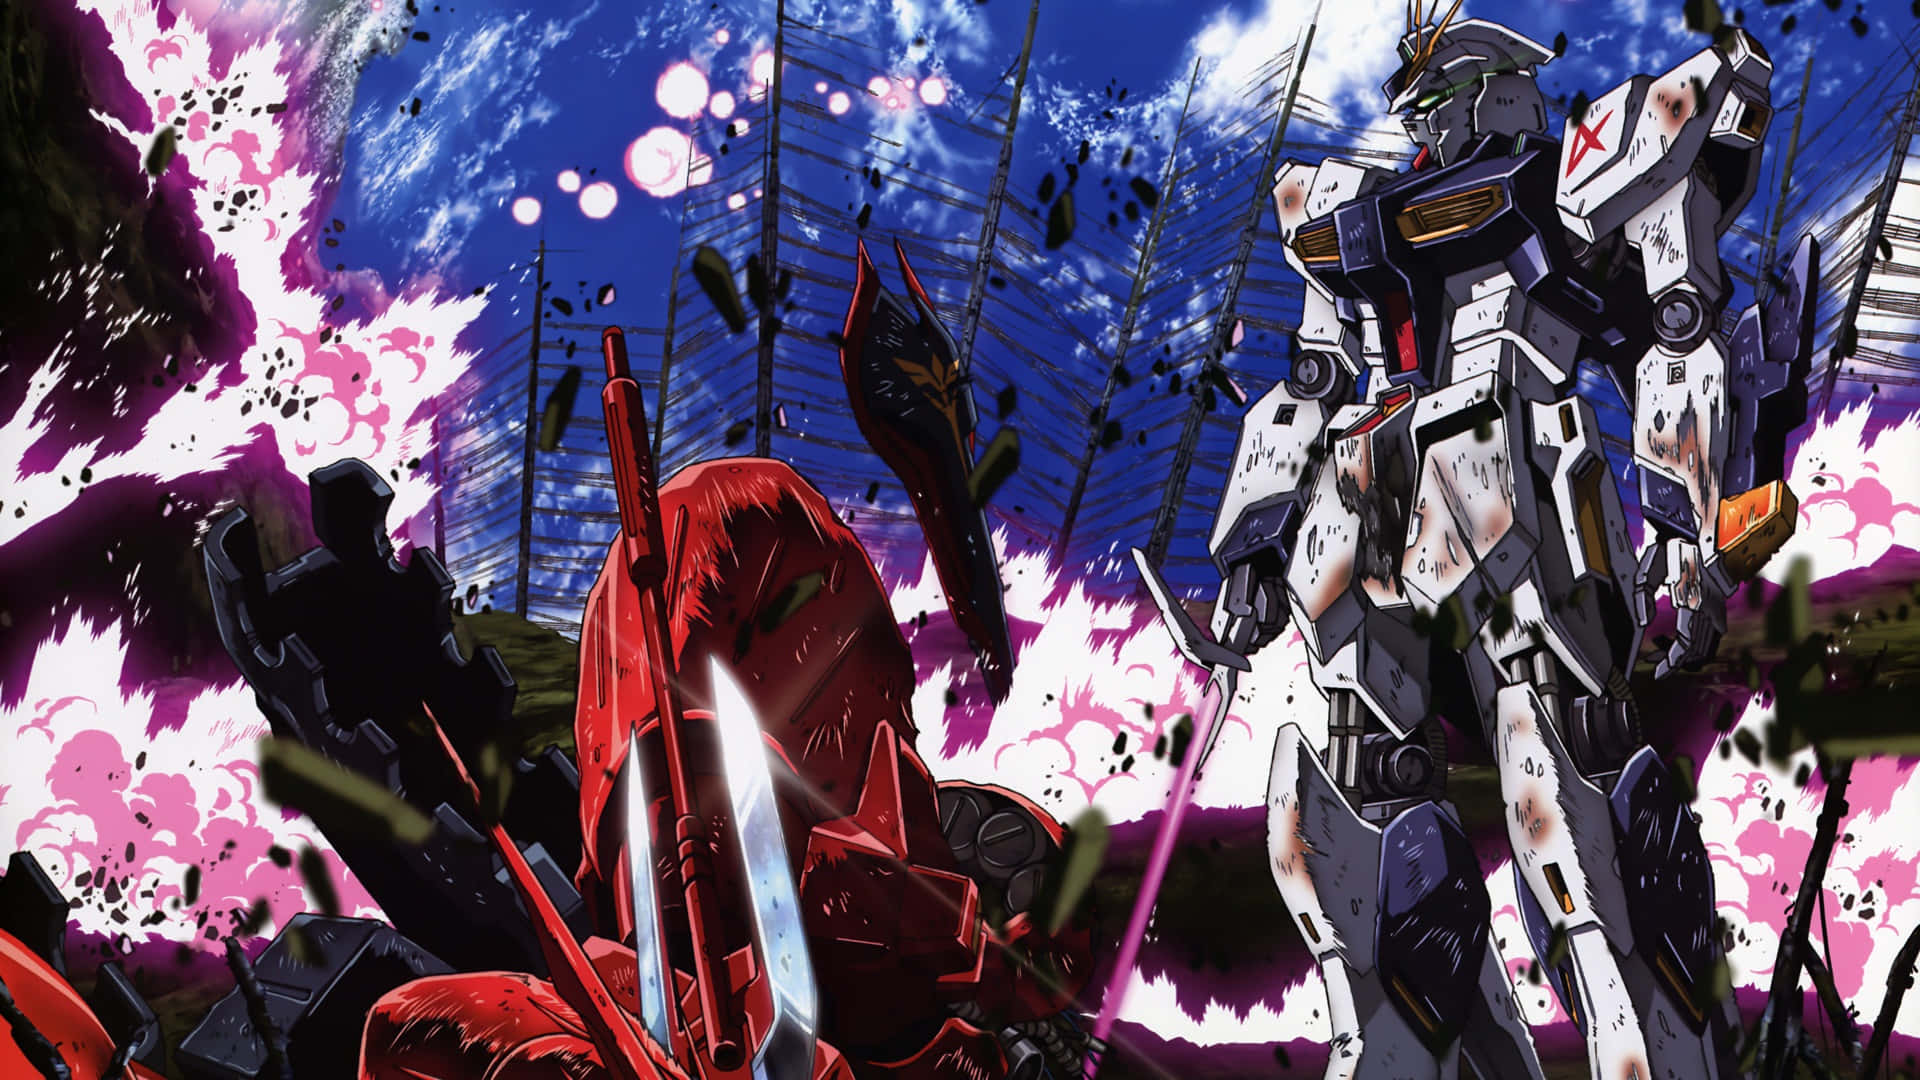 In the midst of self-discovery, the Gundam unlocked the power to defeat evil.